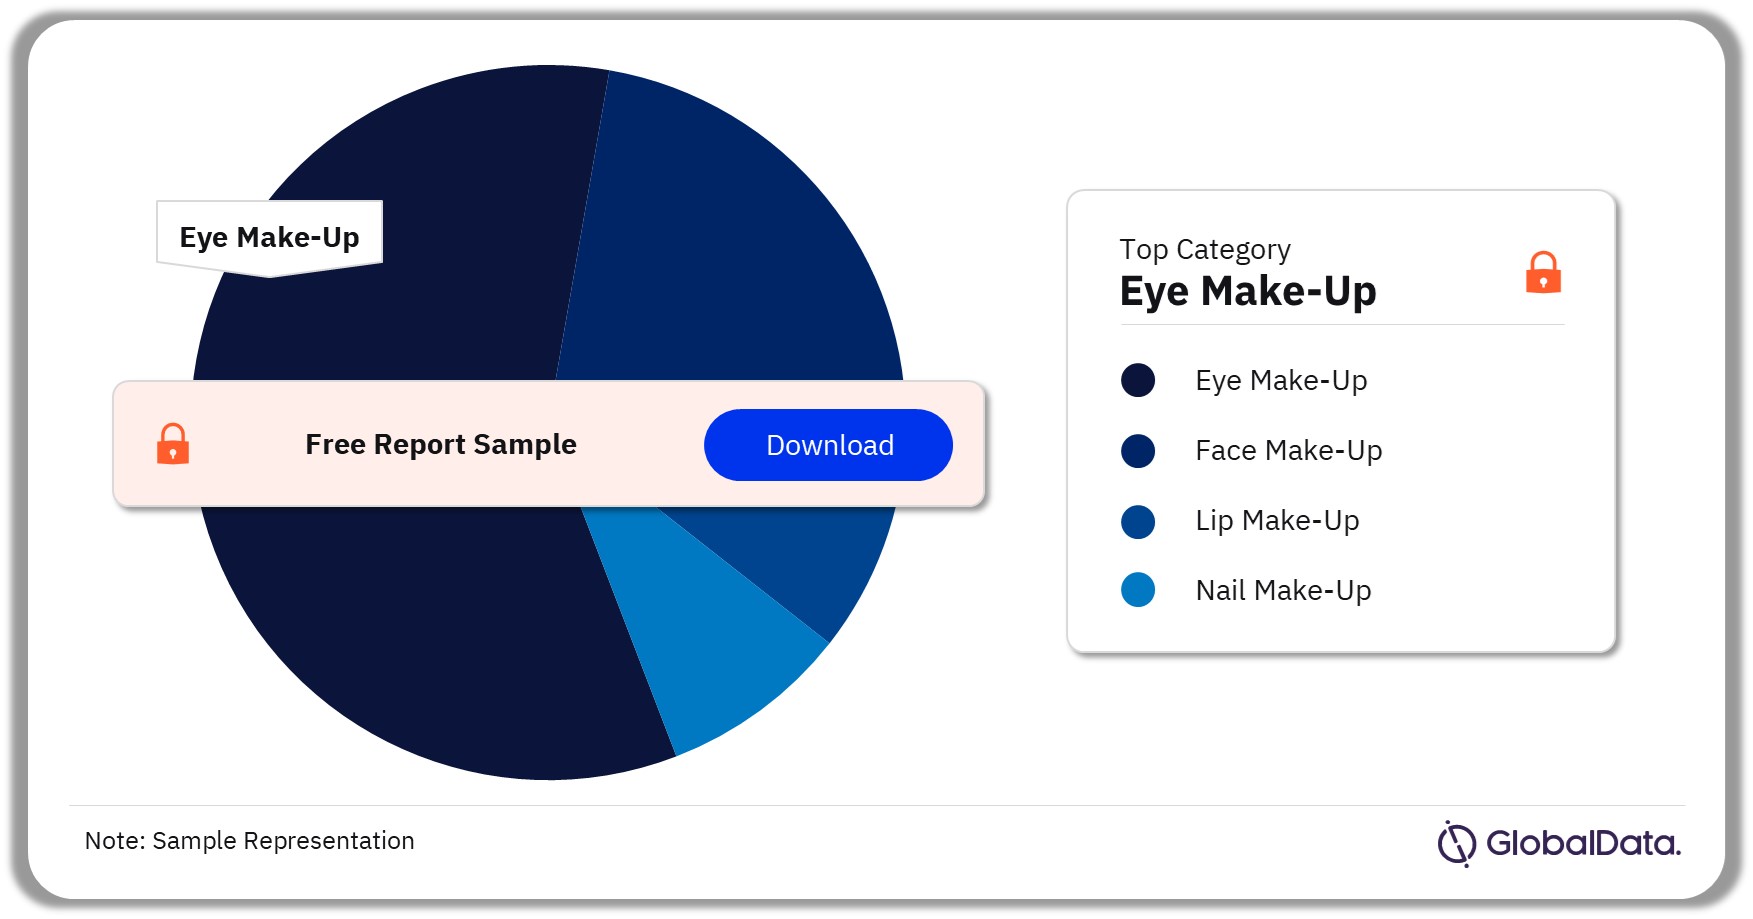 Germany Make-up Market Analysis, by Categories, 2021 (%)